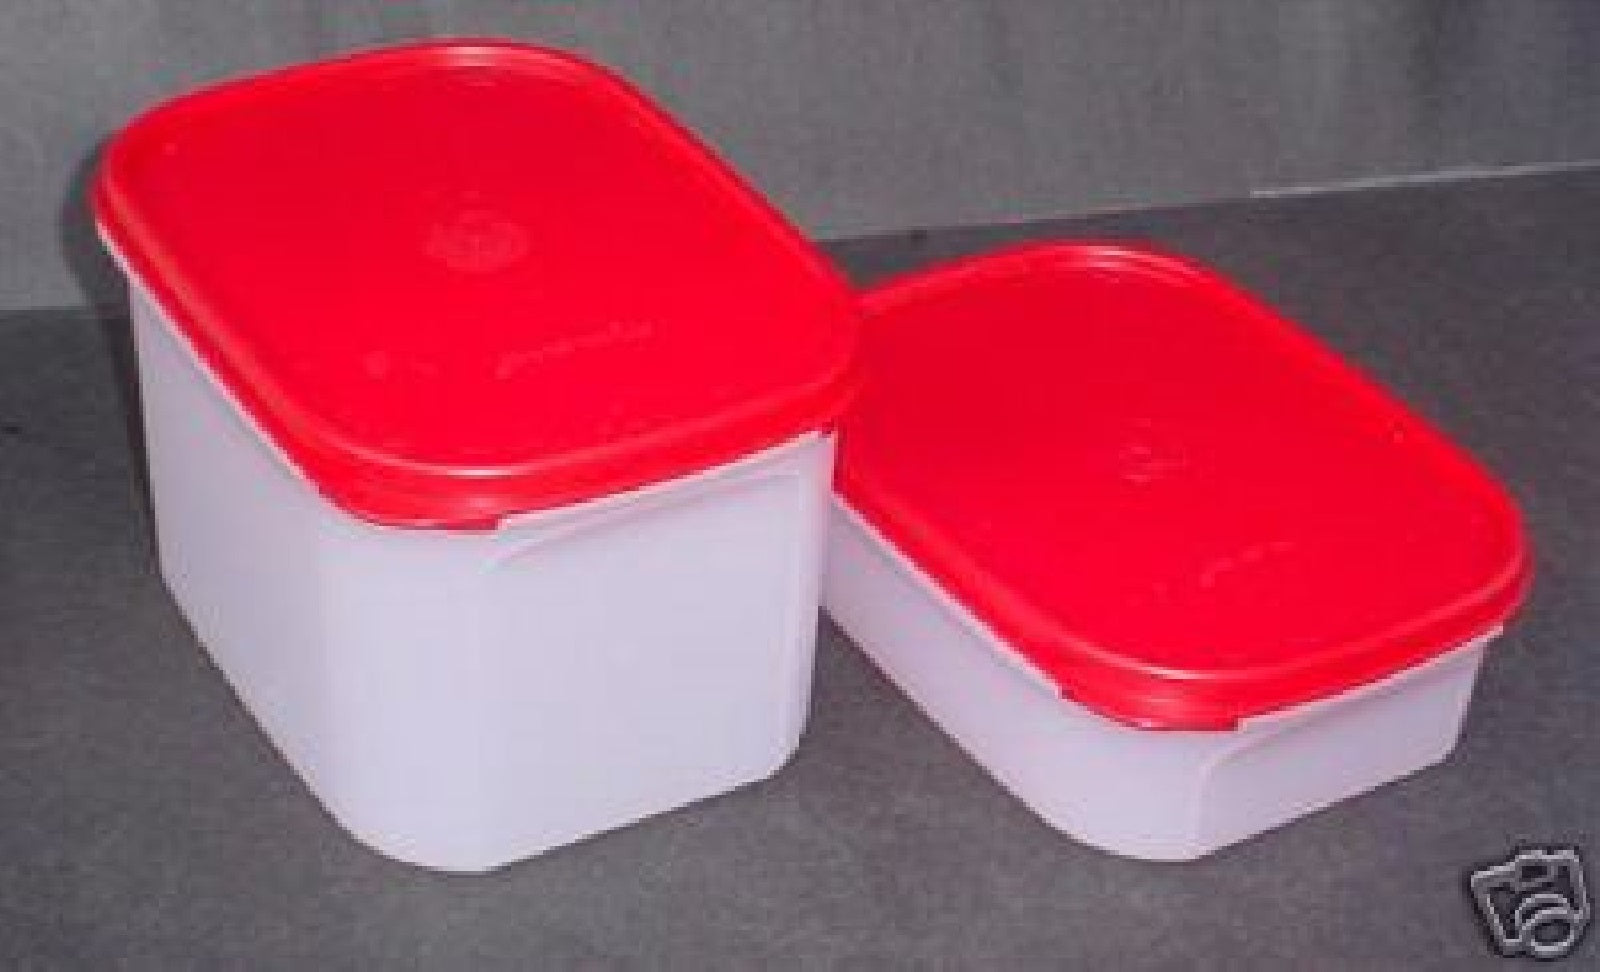  Tupperware Modular Mates Rectangle 1 Black Seal Holds 8 1/2  Cups : Home & Kitchen